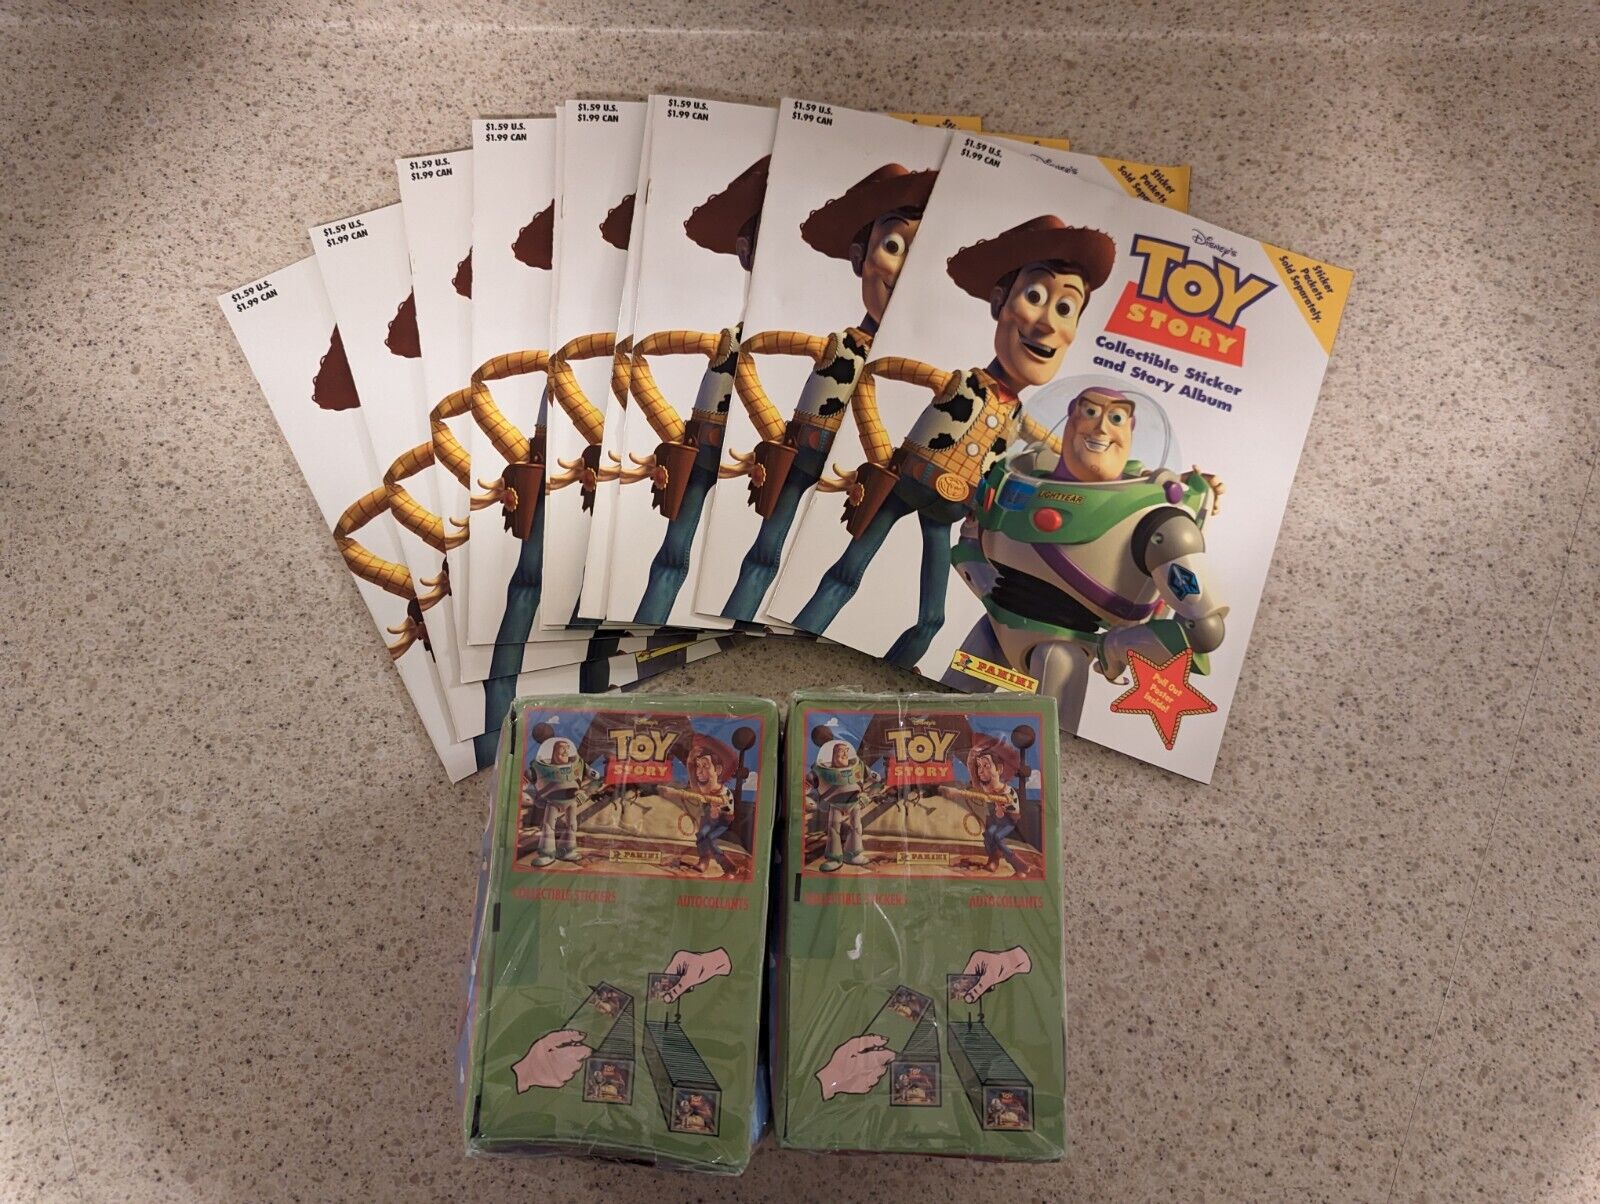 TOY STORY 1996 PANINI STICKER ALBUM X 10 WITH 200 PACKS OF STICKERS SEALED NEW